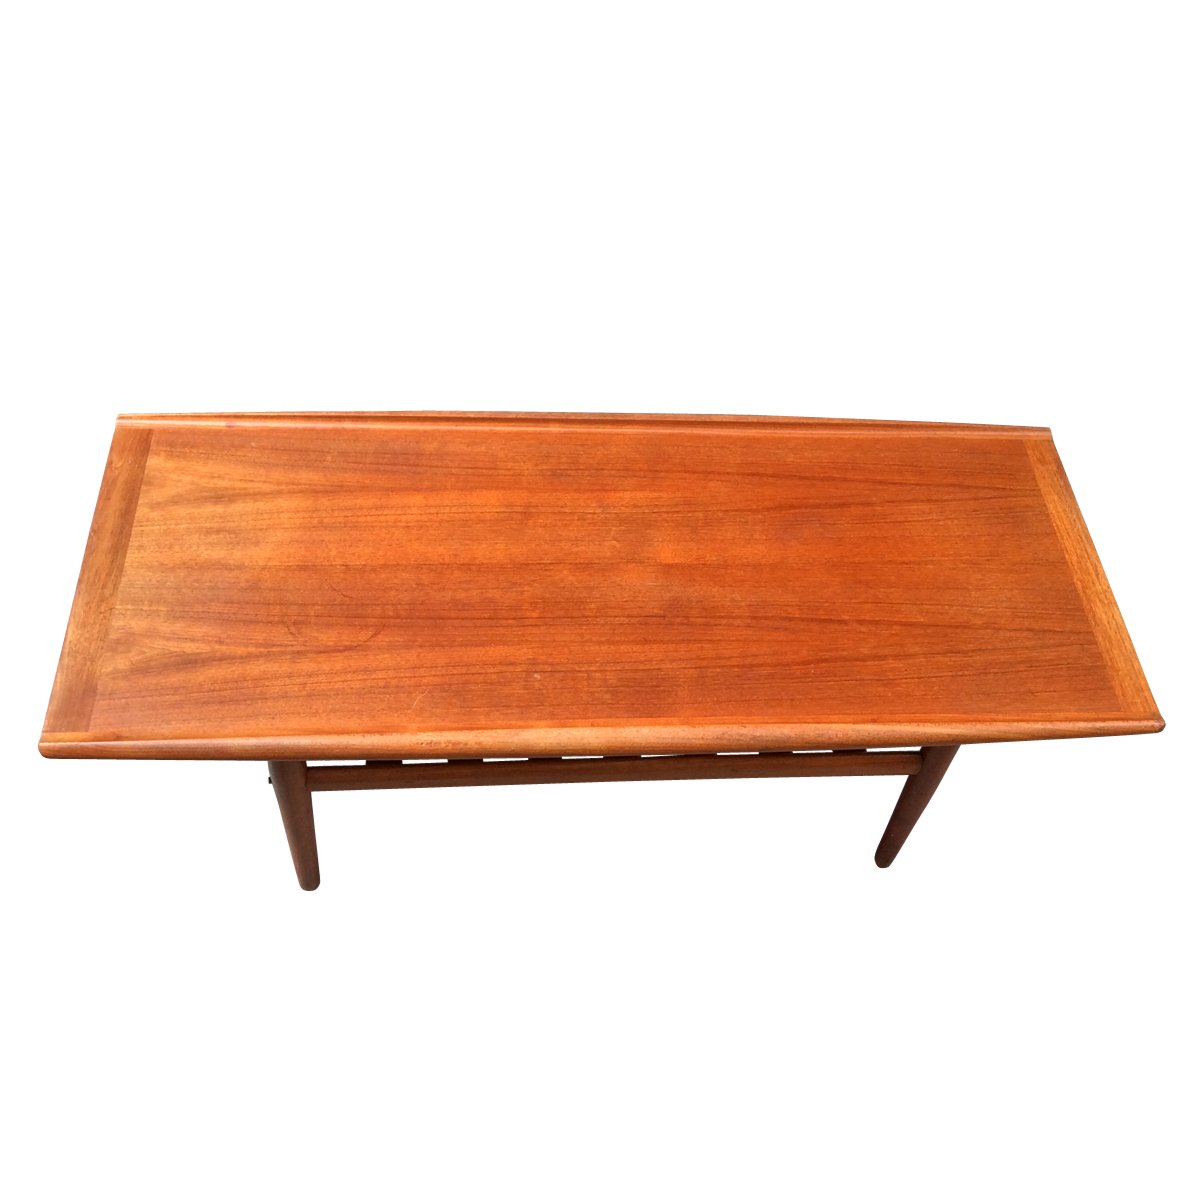 Scandinavian Coffee Table by Grete Jalk for Poul Jeppesen, 1960 for sale at Pamono